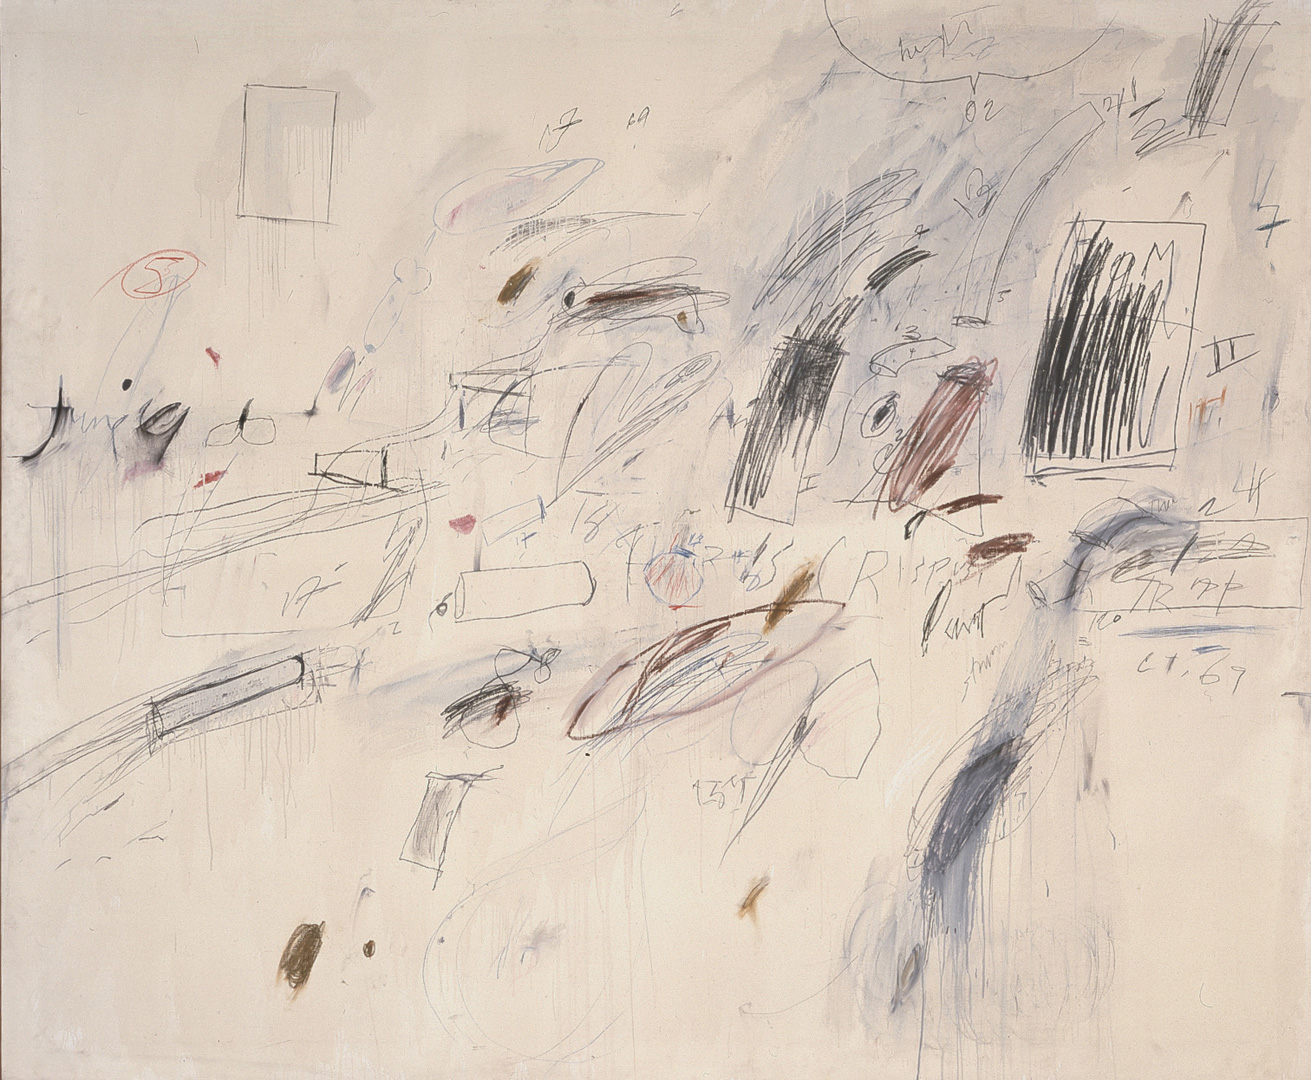 Cy Twombly - Untitled [Bolsena], 1969, oil based house paint, wax crayon, lead pencil and colored pencil on canvas